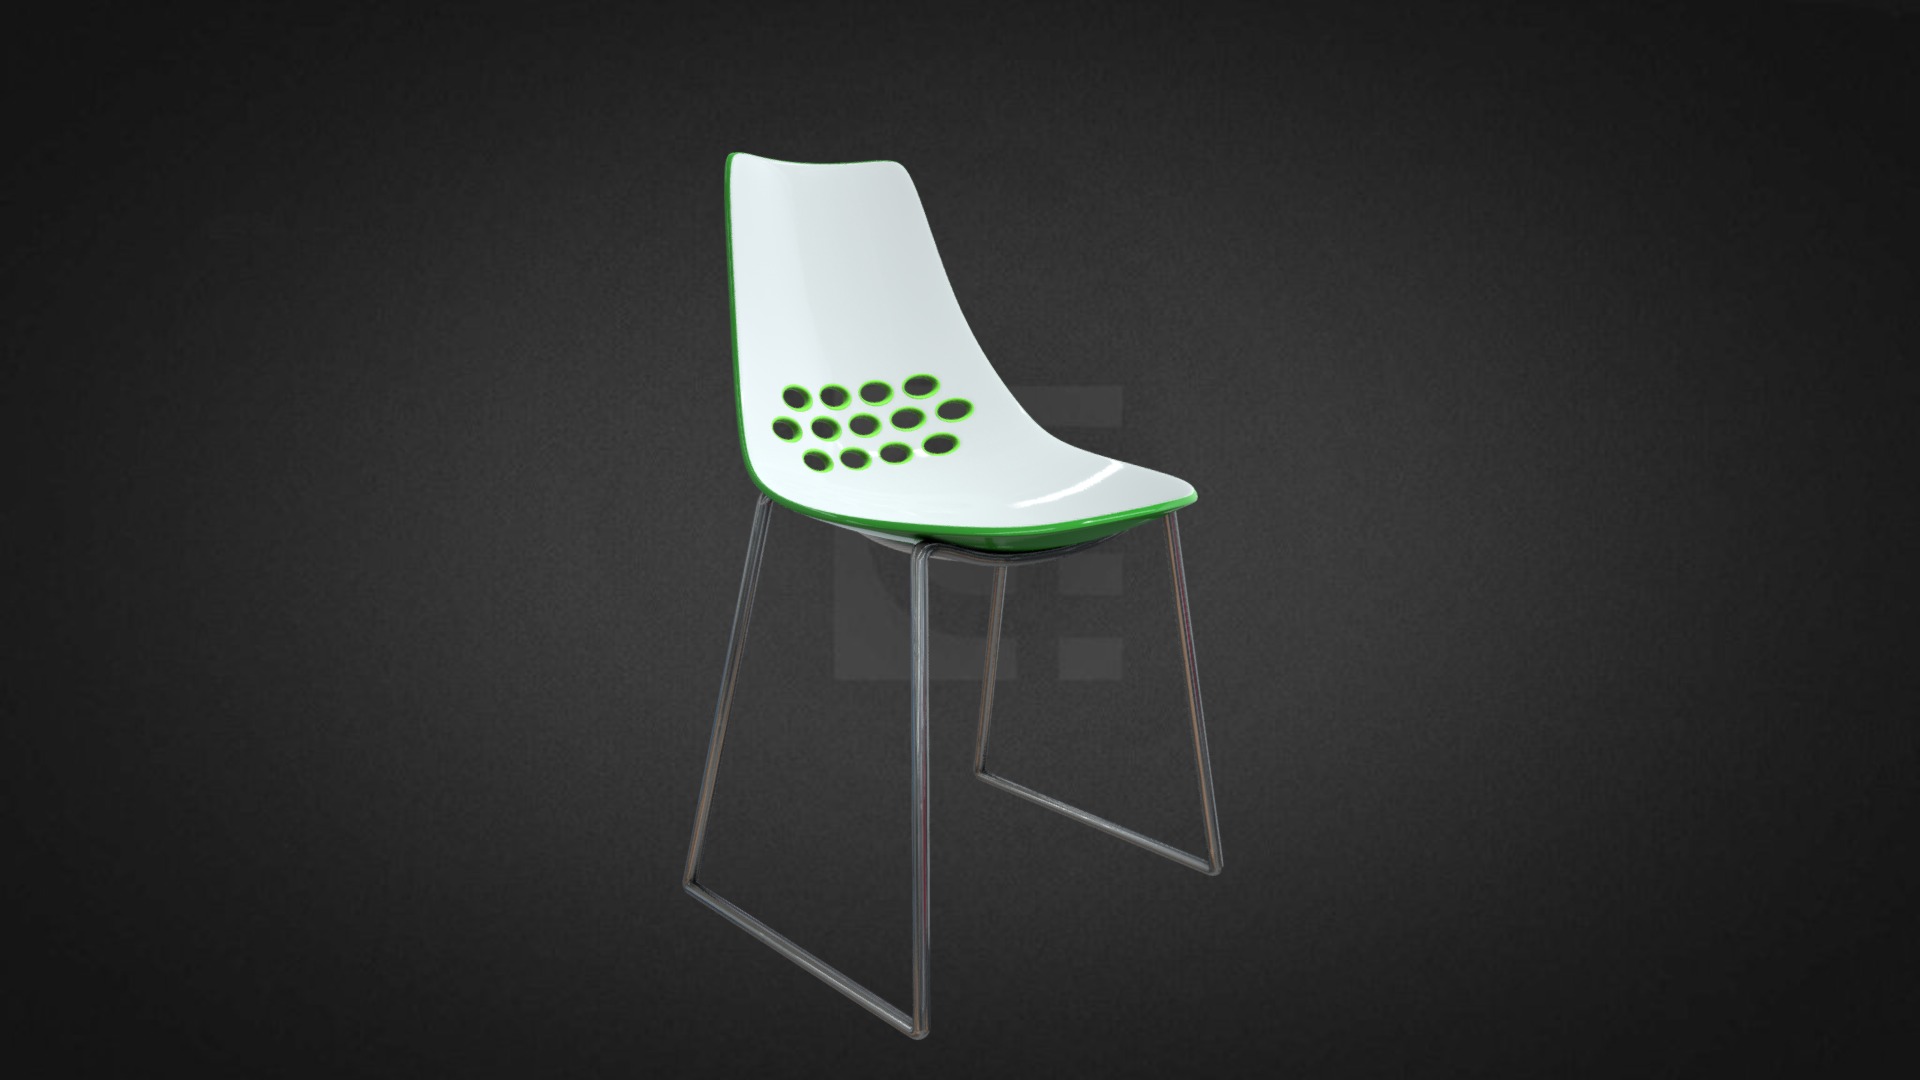 3D model Jam Chair Hire - This is a 3D model of the Jam Chair Hire. The 3D model is about a cube with a green and white design on it.